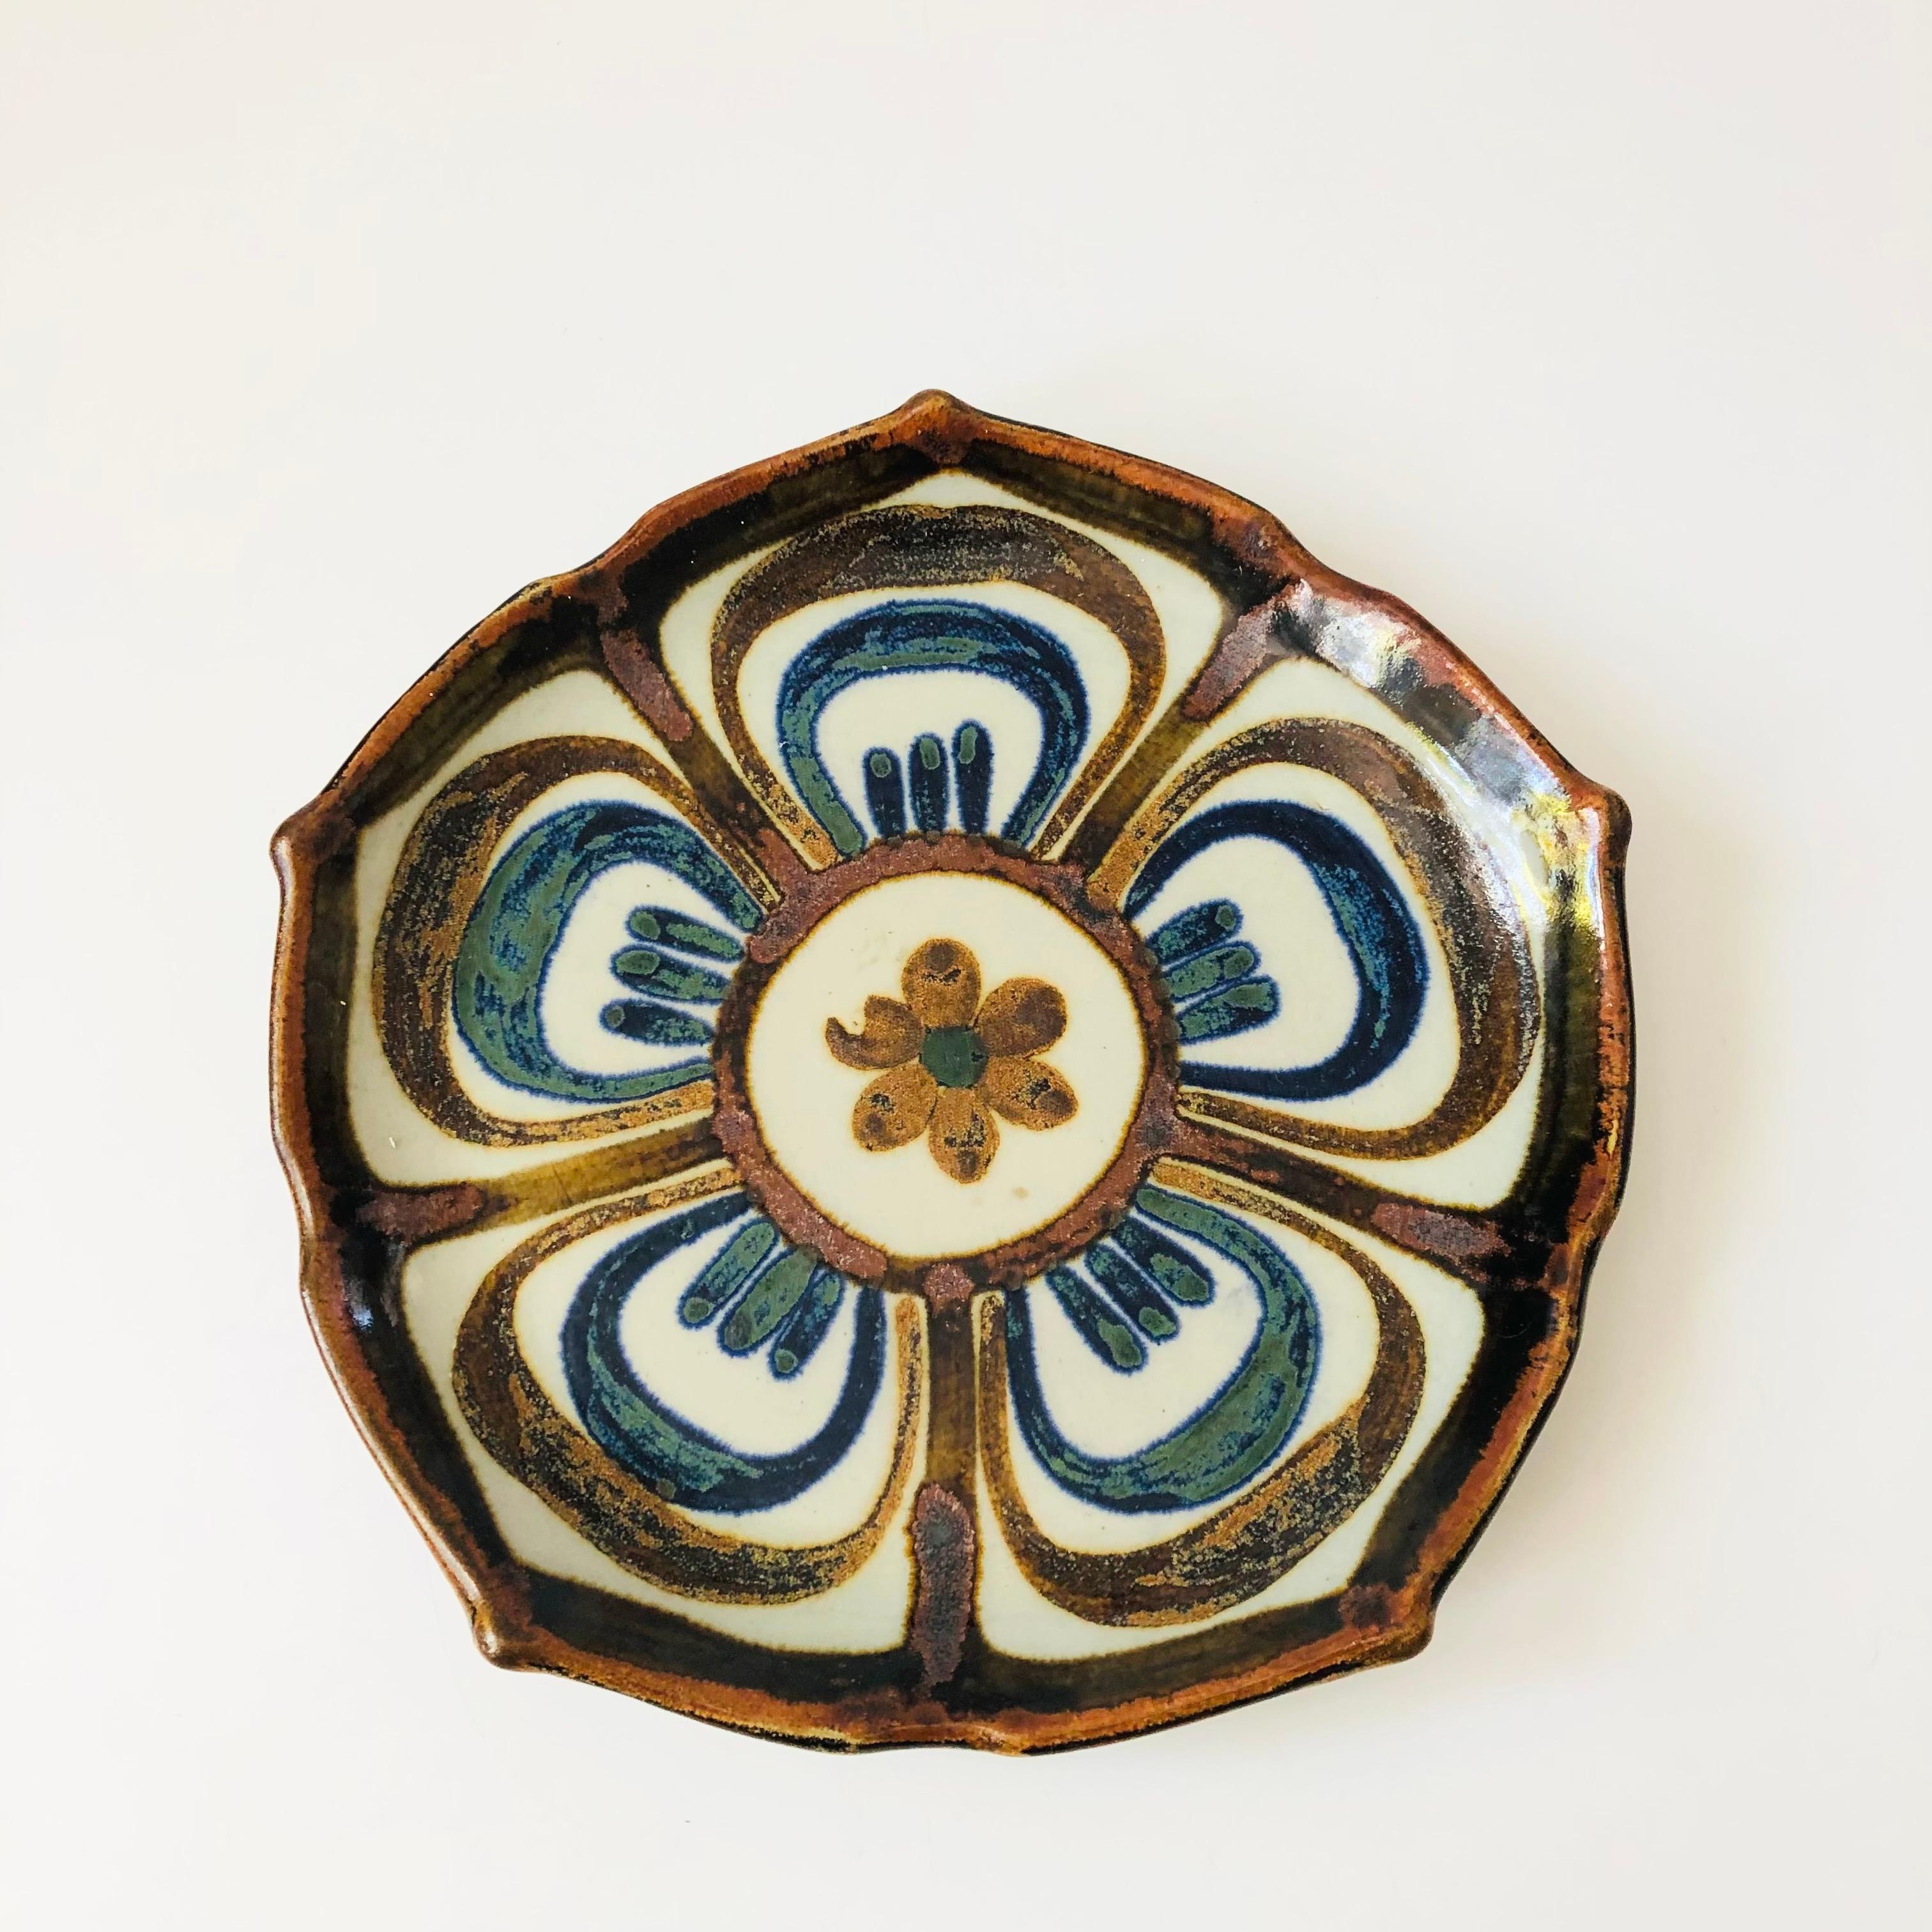 A large Tonala el Palomar Mexican folk art pottery plate in the lotus design by Ken Edwards. Beautiful handpainted accents in blue and brown glazes. Marked on the base. Nice size for using as a serving or decorative tray.

